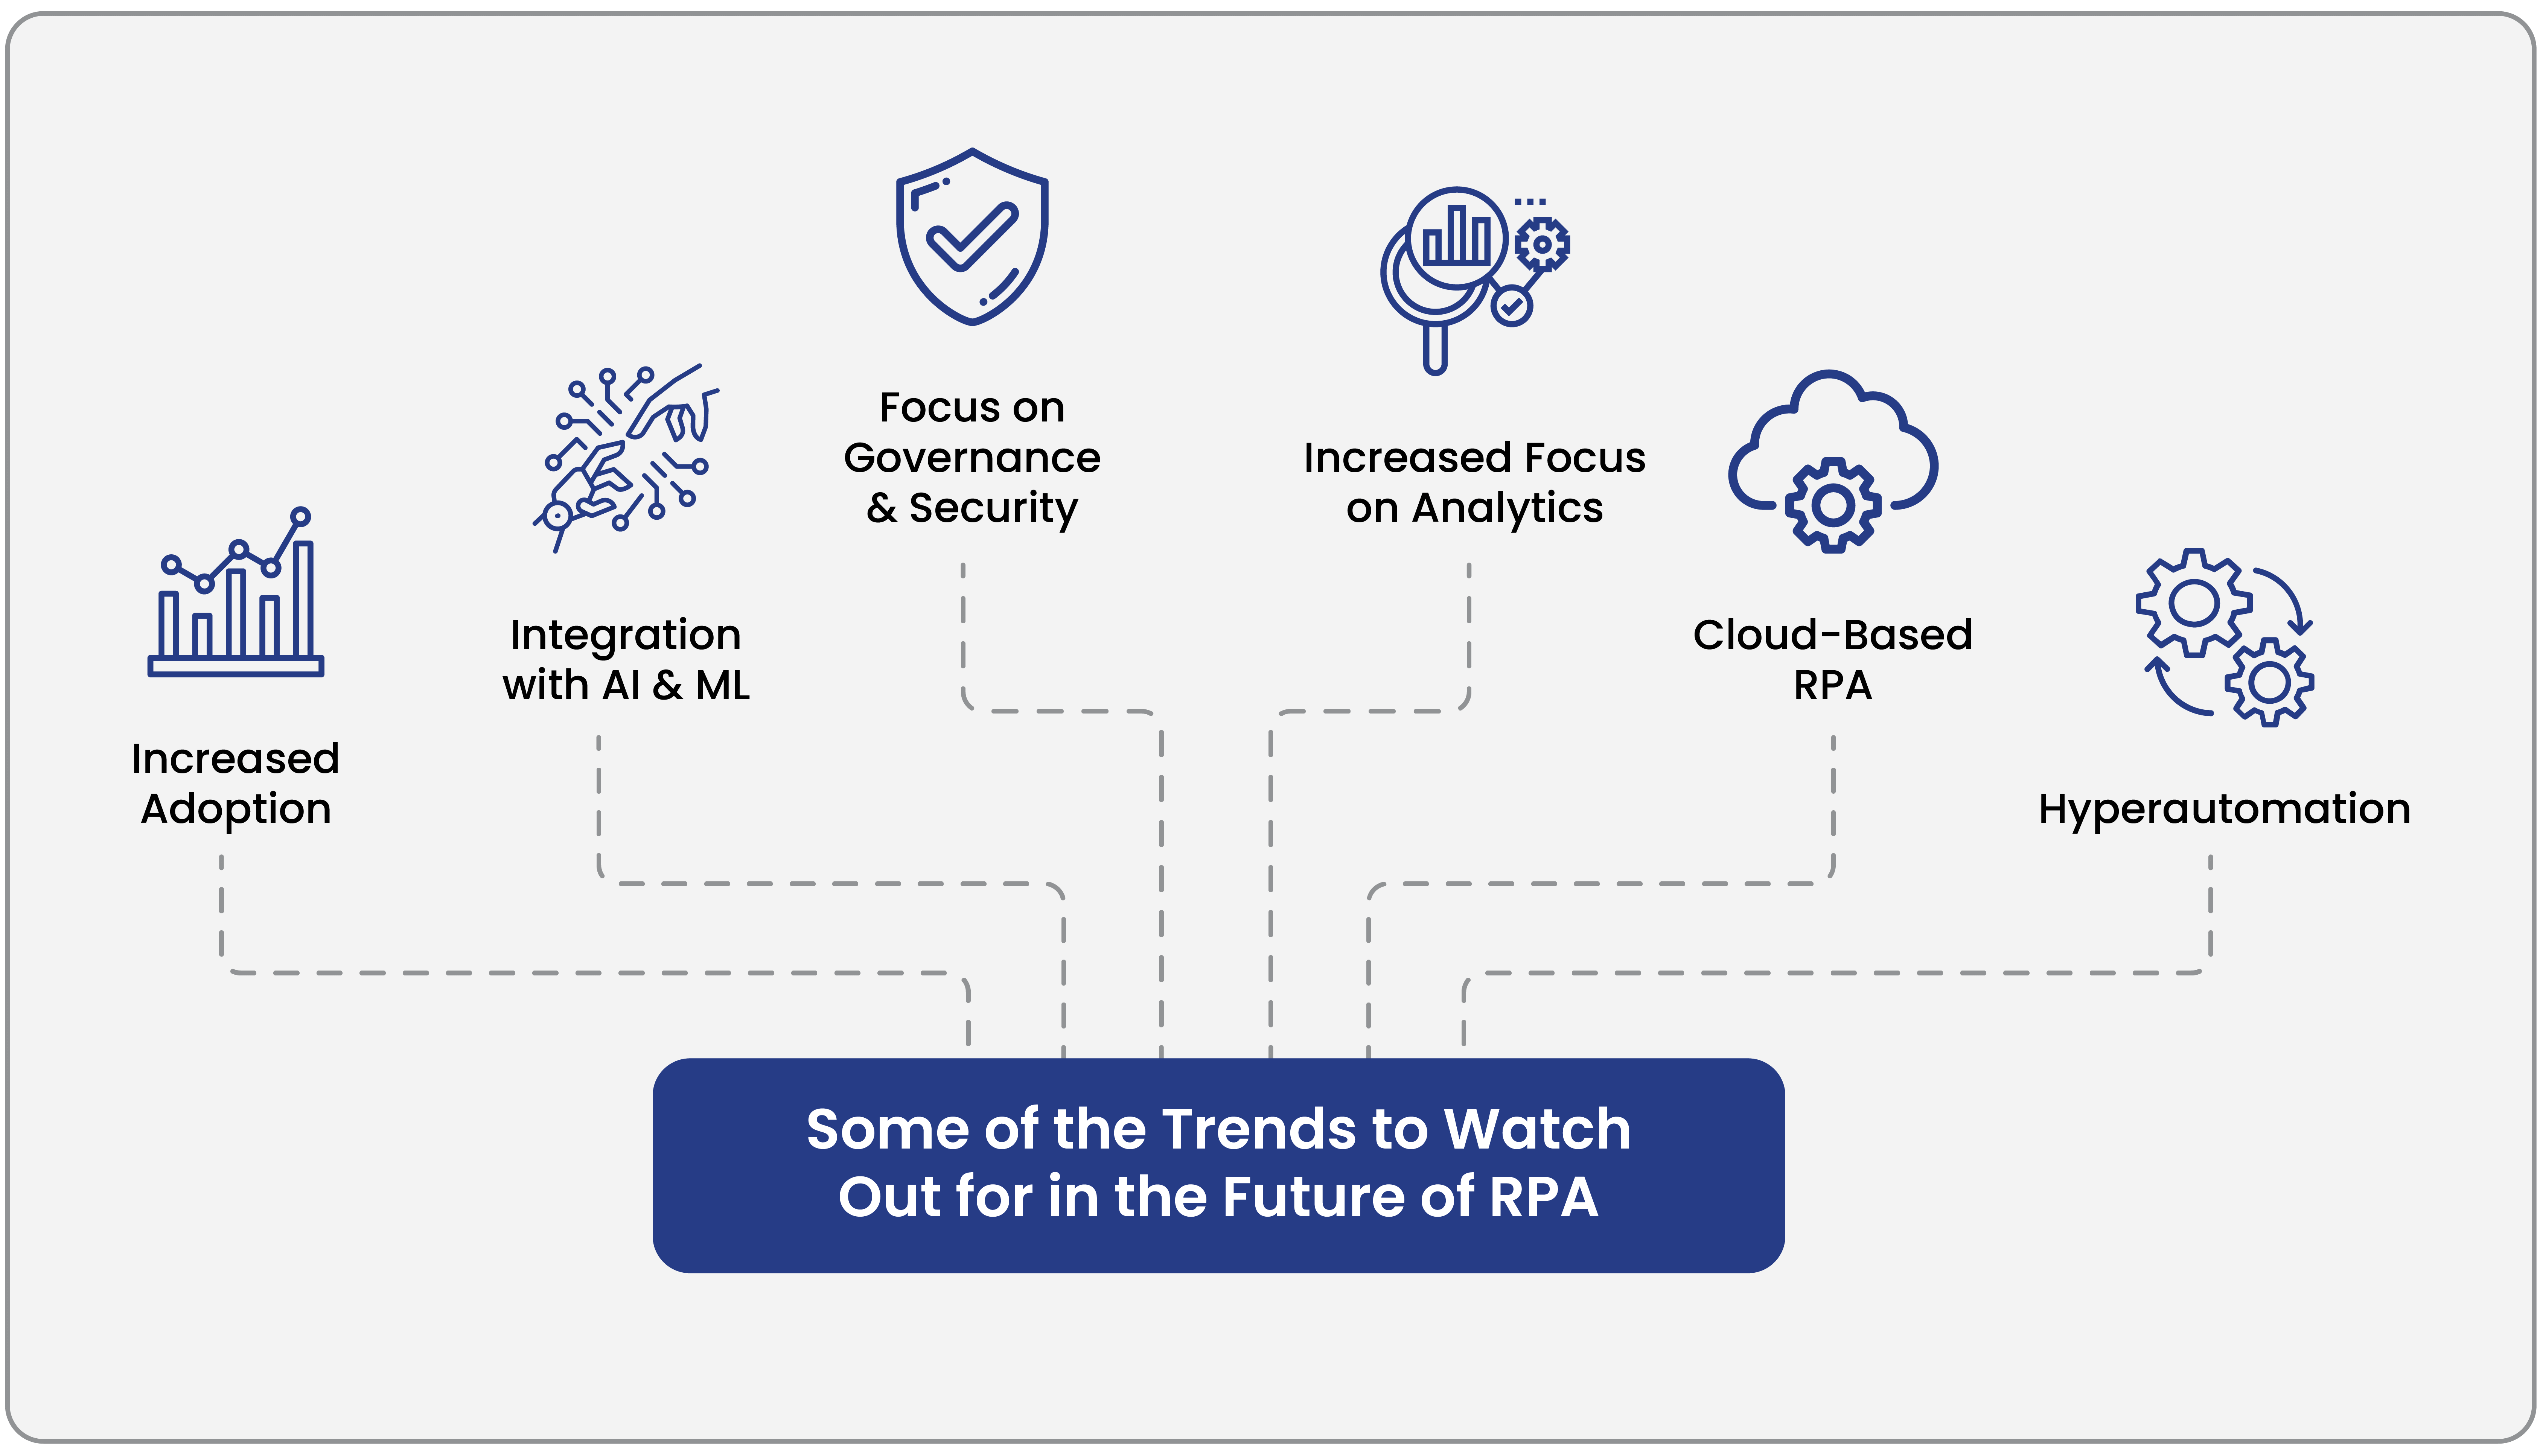 Trends to Watch Out for in the Future of RPA